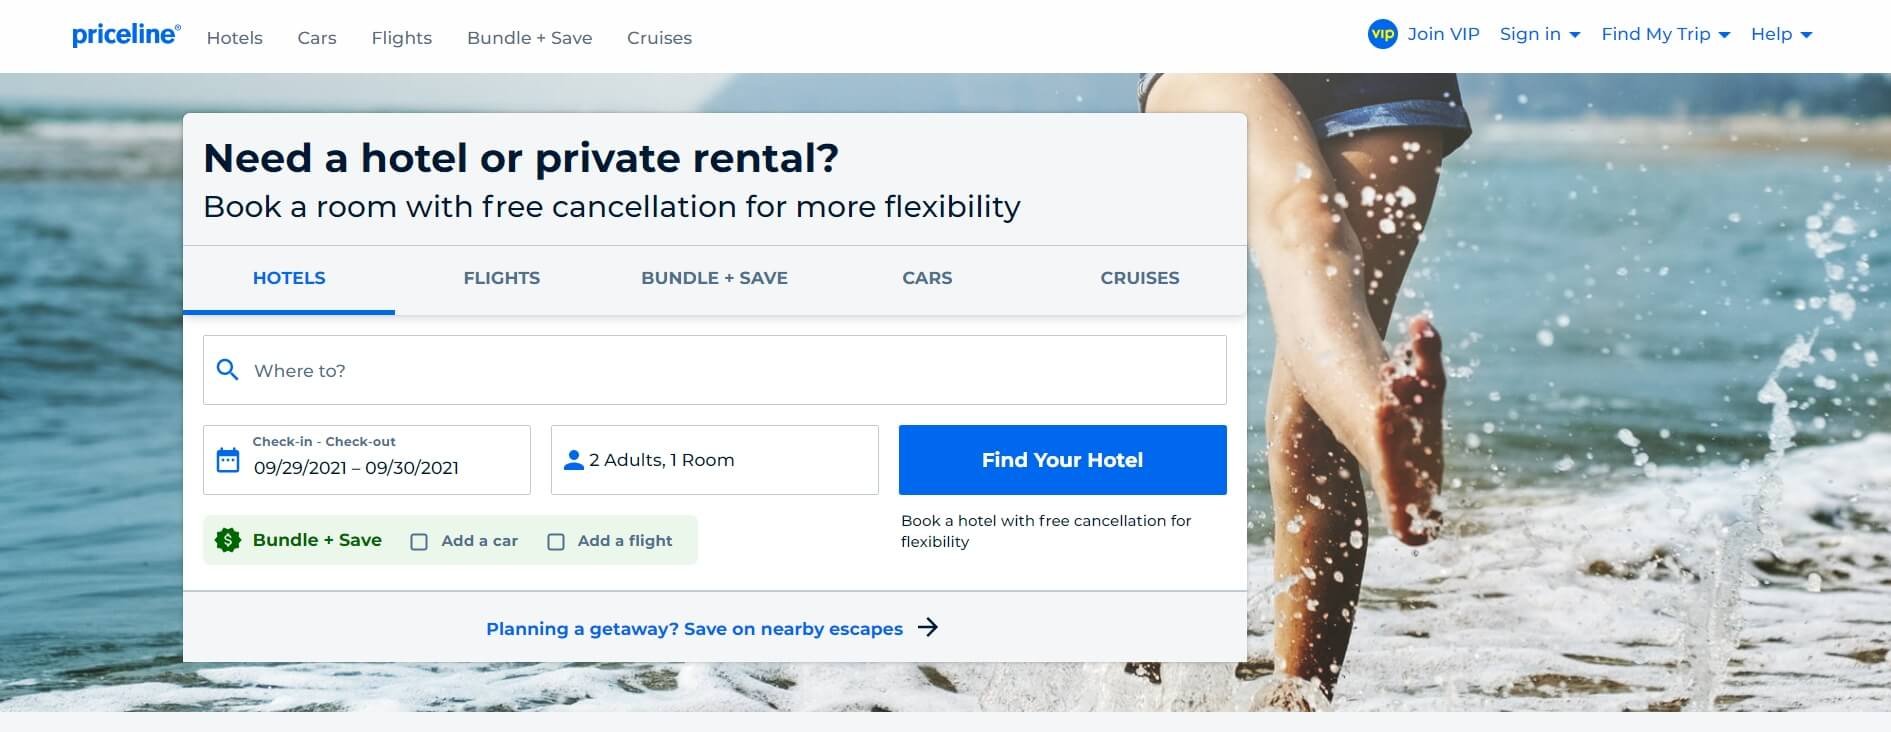 Priceline on ReadSomeReviews